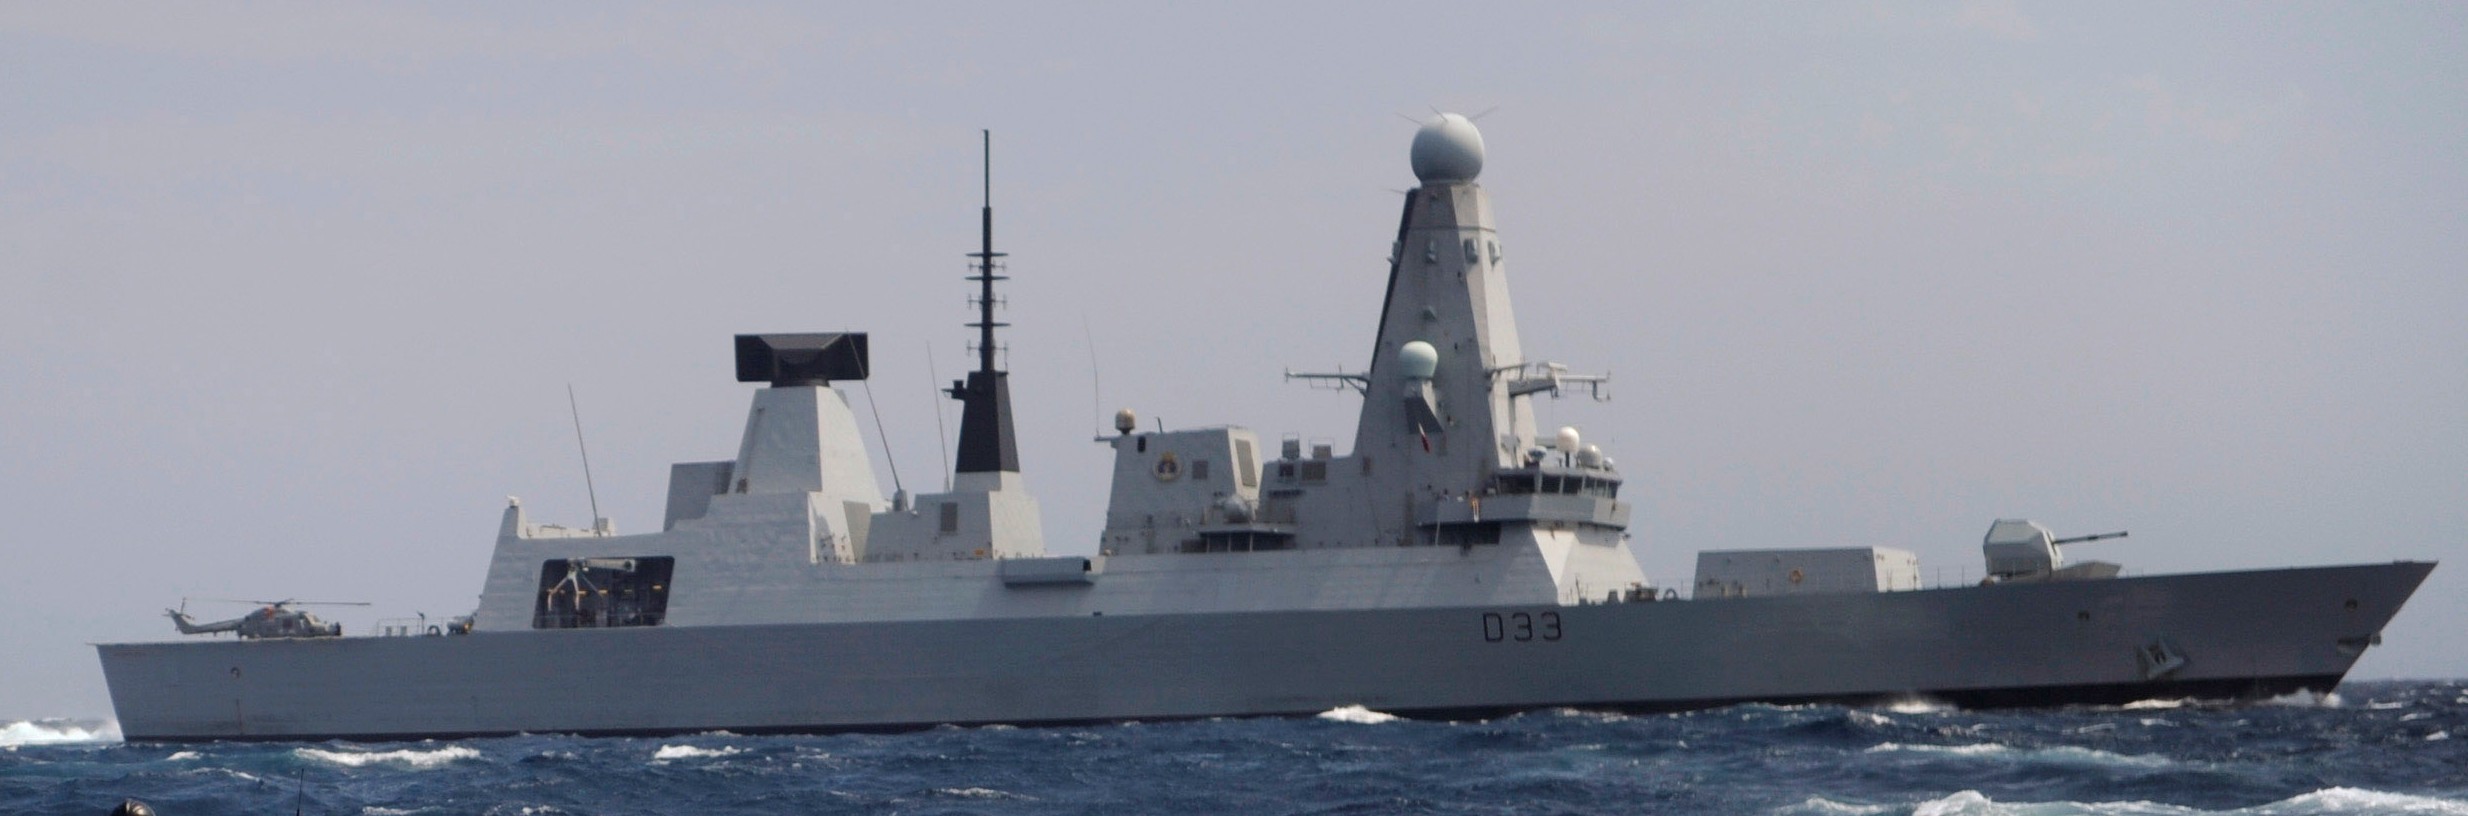 hms dauntless d-33 type 45 daring class guided missile destroyer royal navy sea viper paams 22